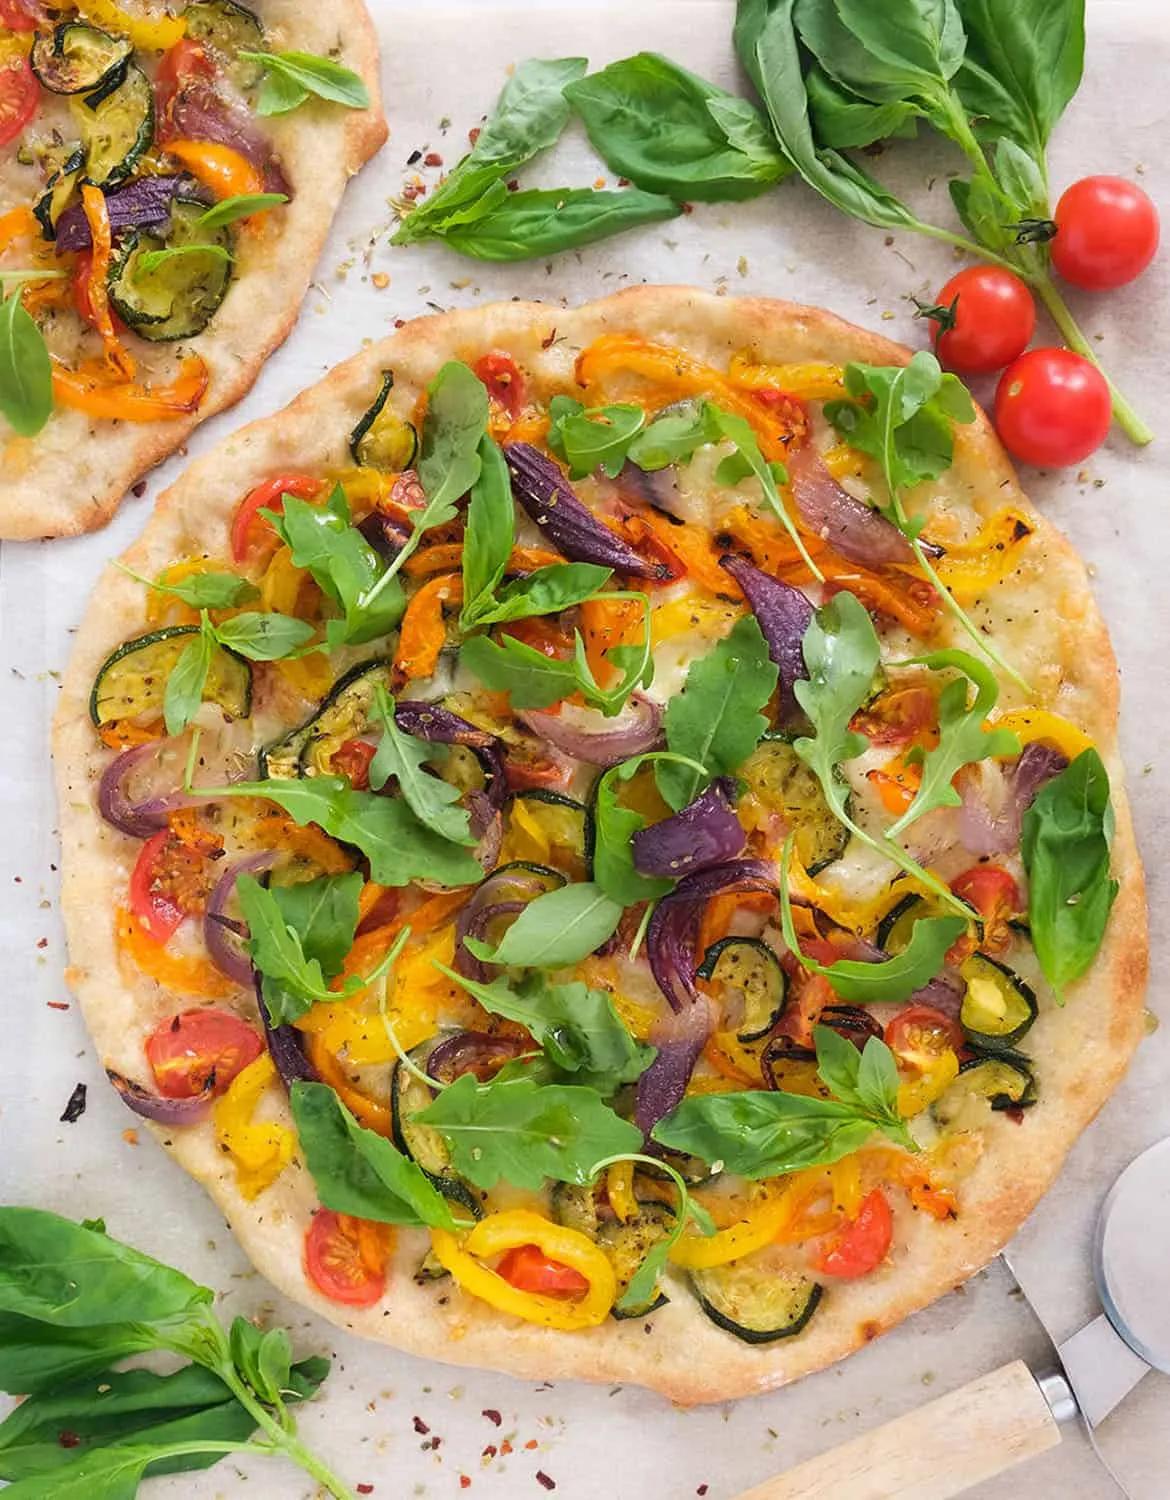 17 Yummy Veggie Pizza Recipes - The clever meal